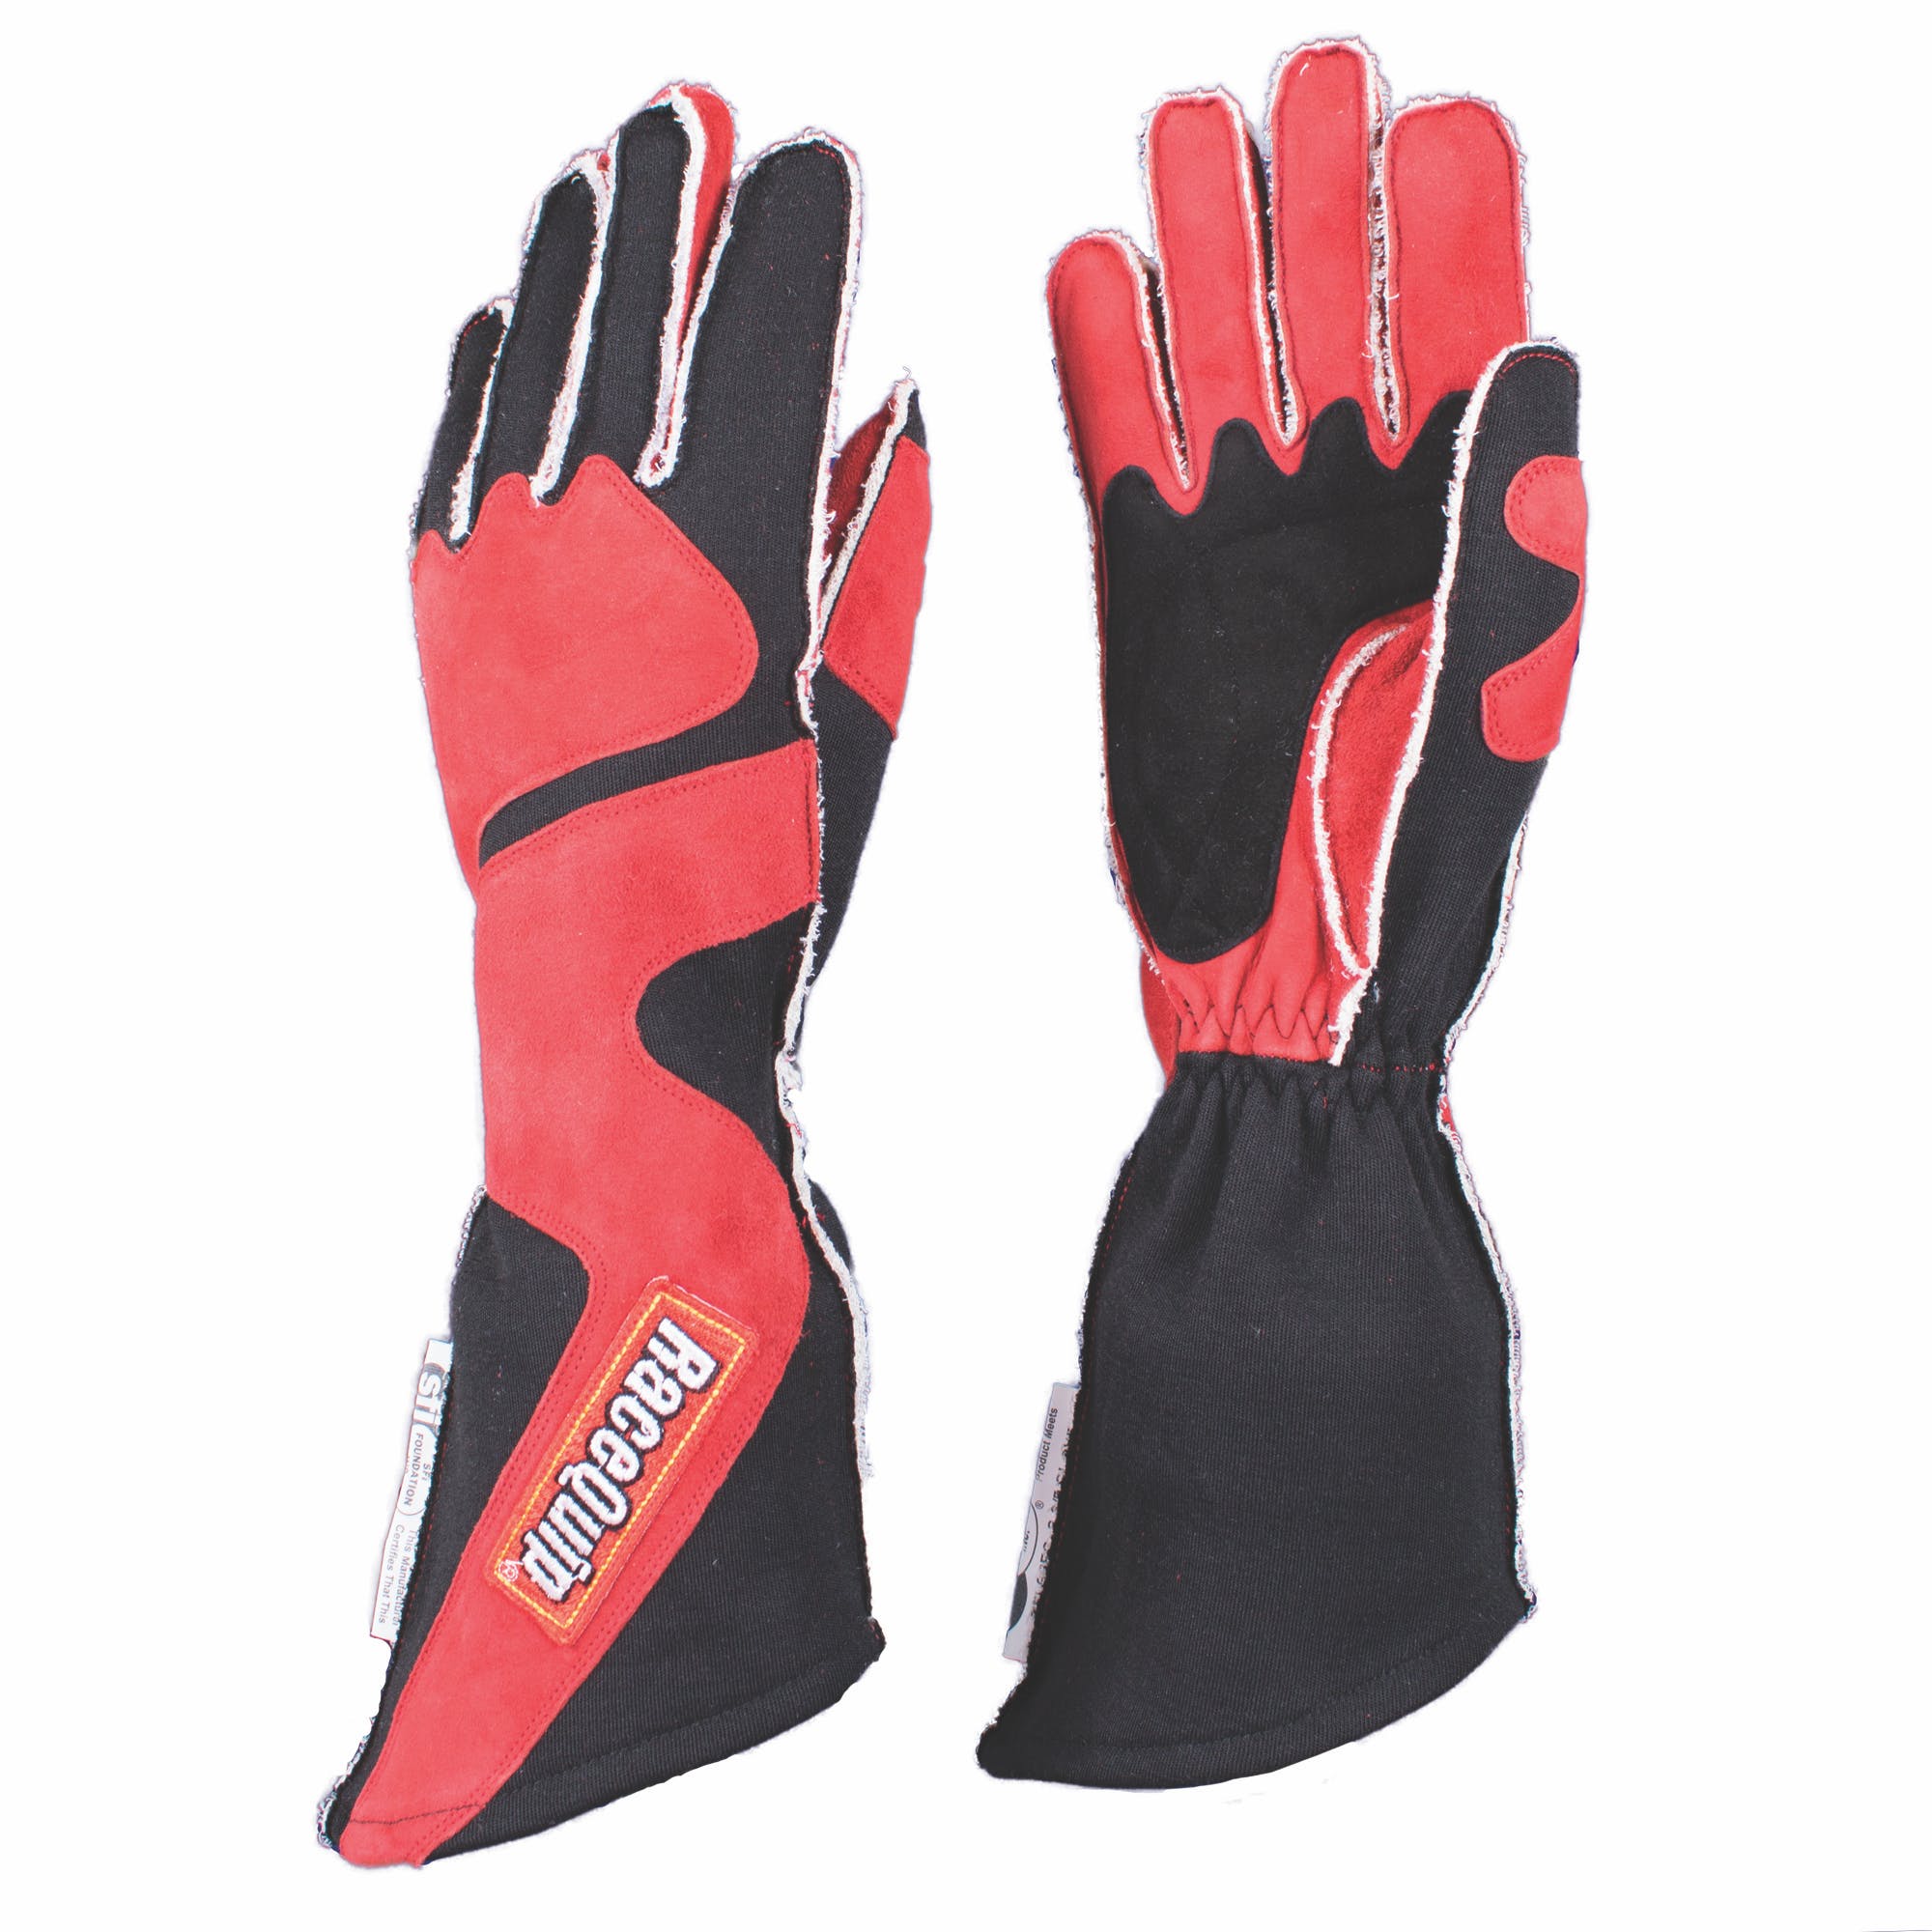 RaceQuip 359106 SFI-5 Out Seam Angle-Cut Gauntlet Racing Gloves (Red/Black, X-Large)